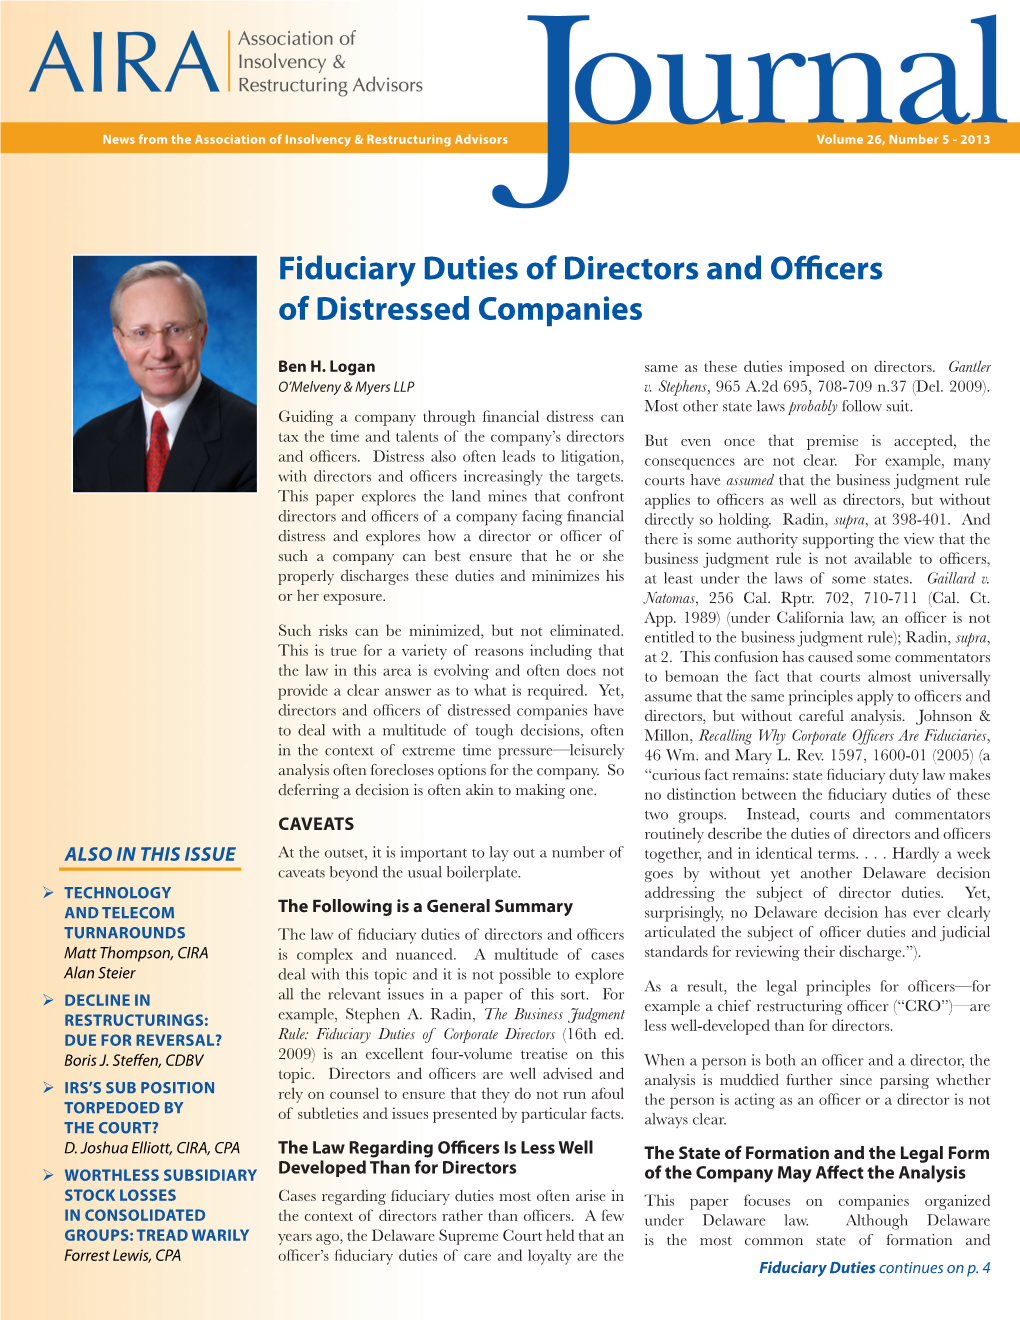 Fiduciary Duties of Directors and Officers of Distressed Companies